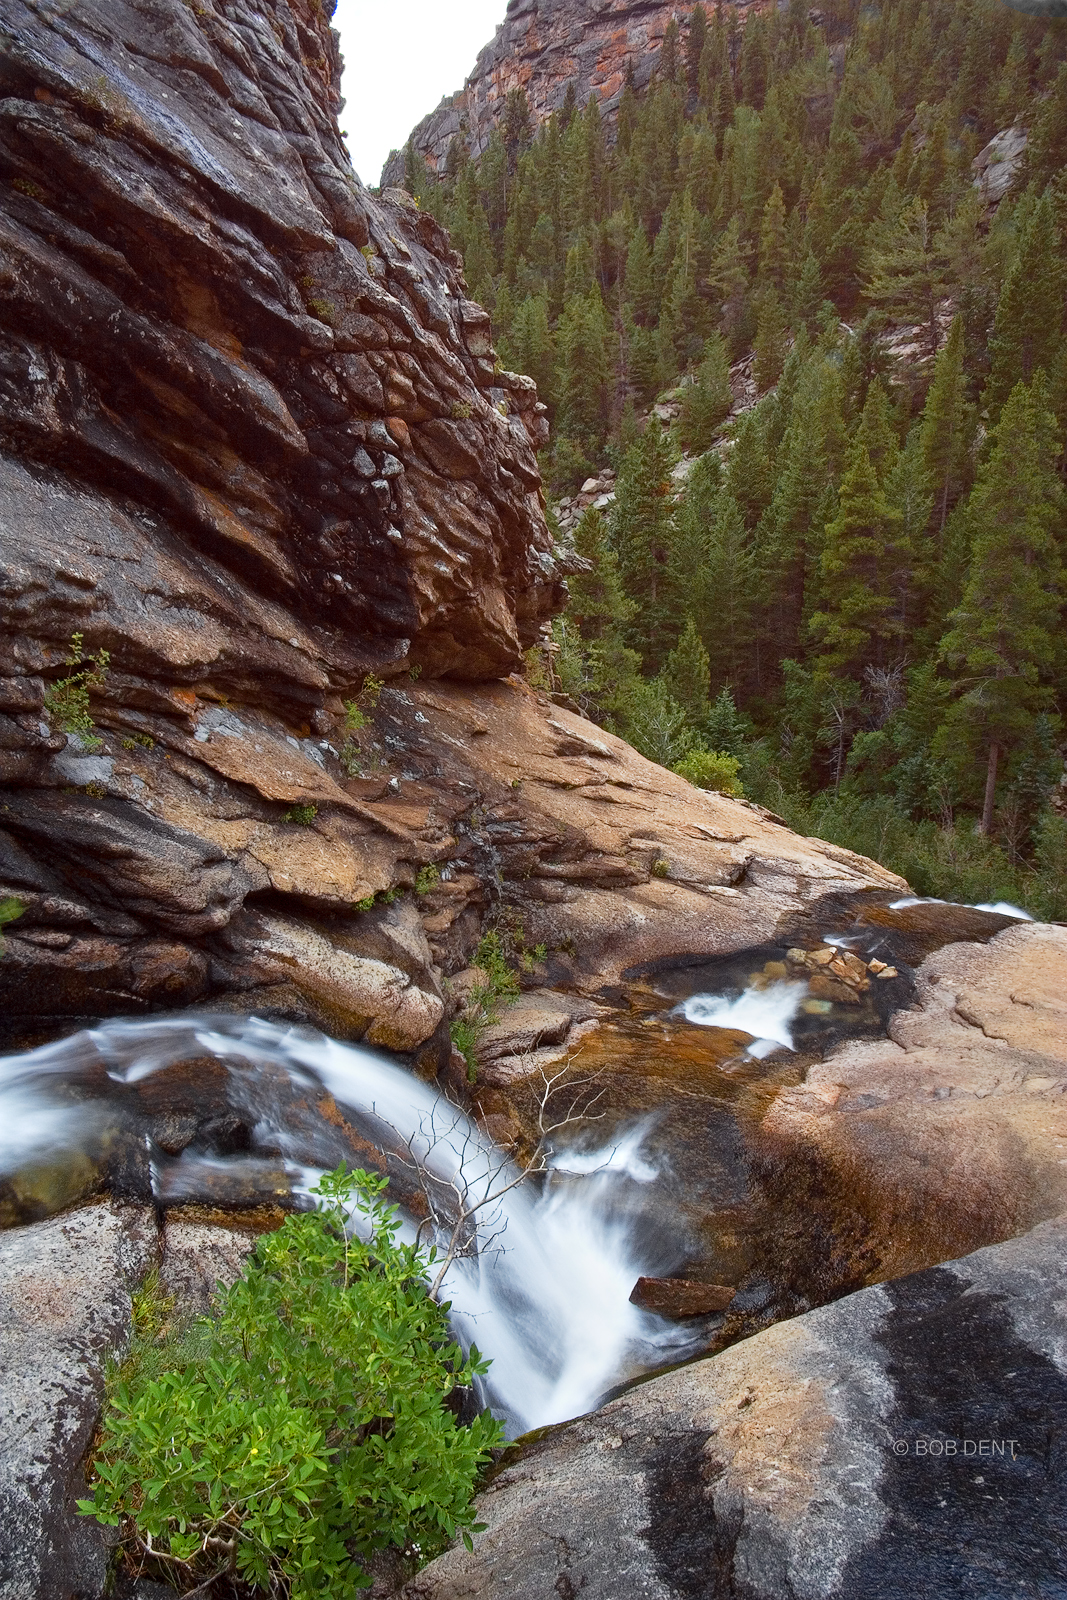 Looking down on the upper section of Bridal Veil Falls, Rocky Mountain National Park, Colorado.